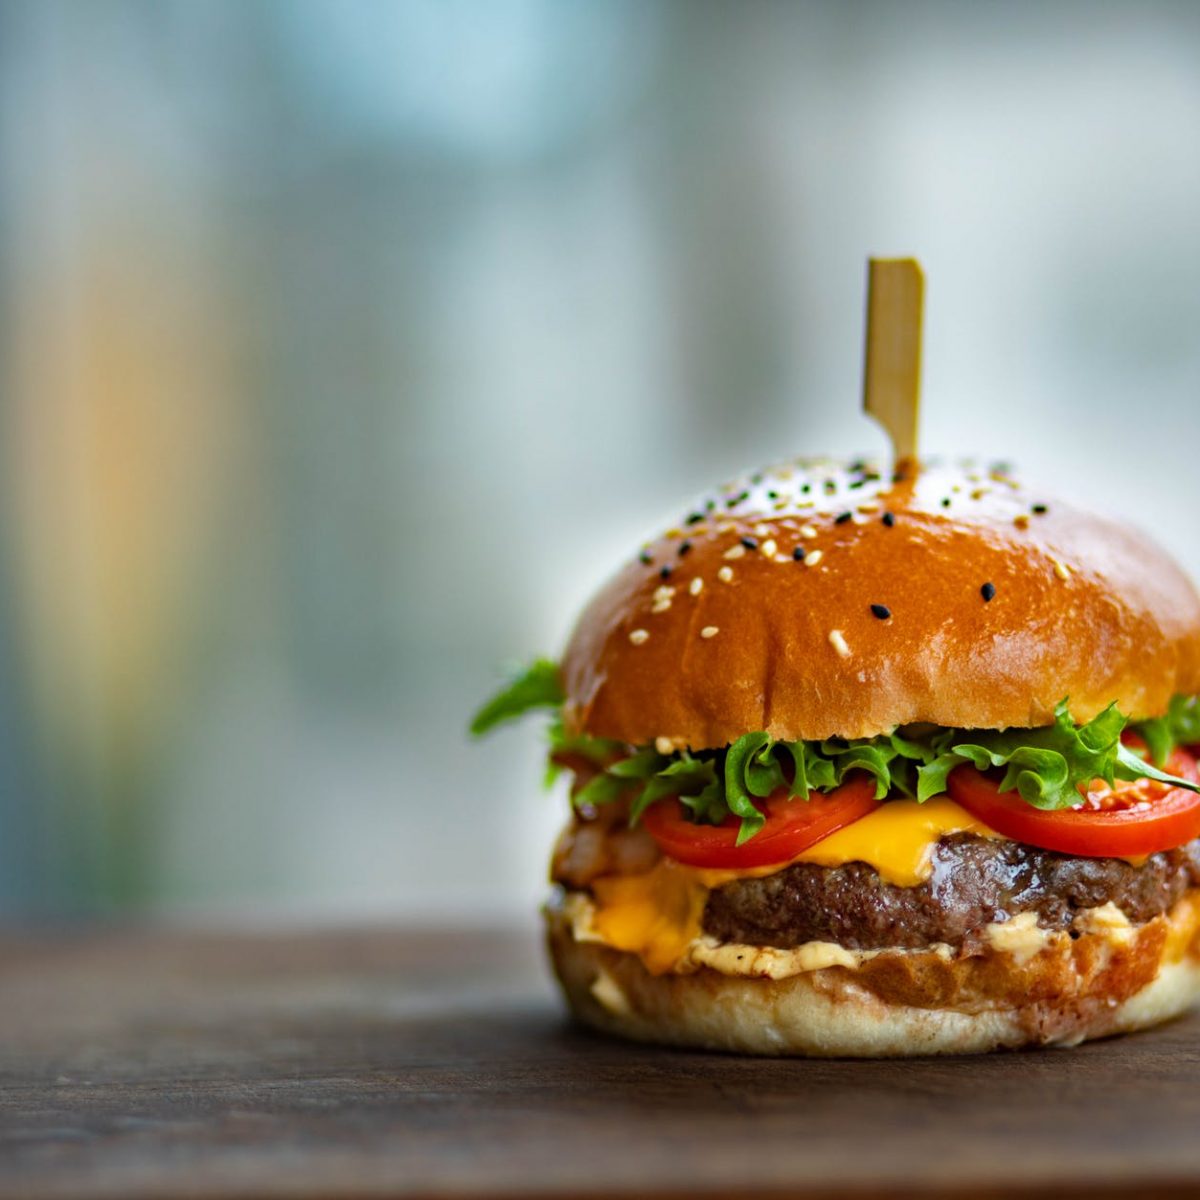 photo of juicy burger on wooden surface